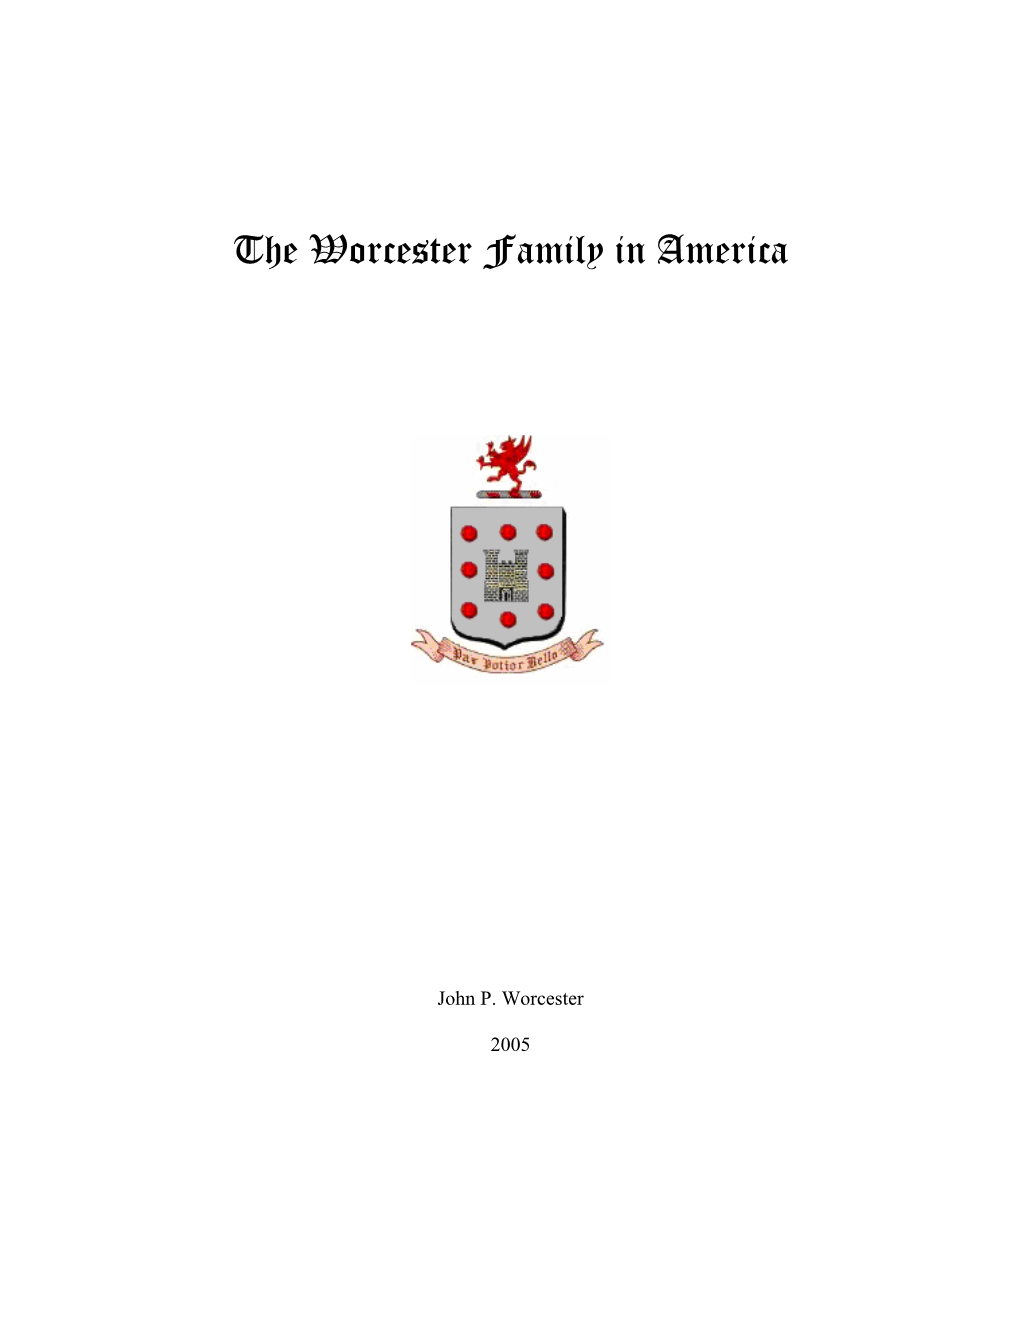 The Worcester Family in America